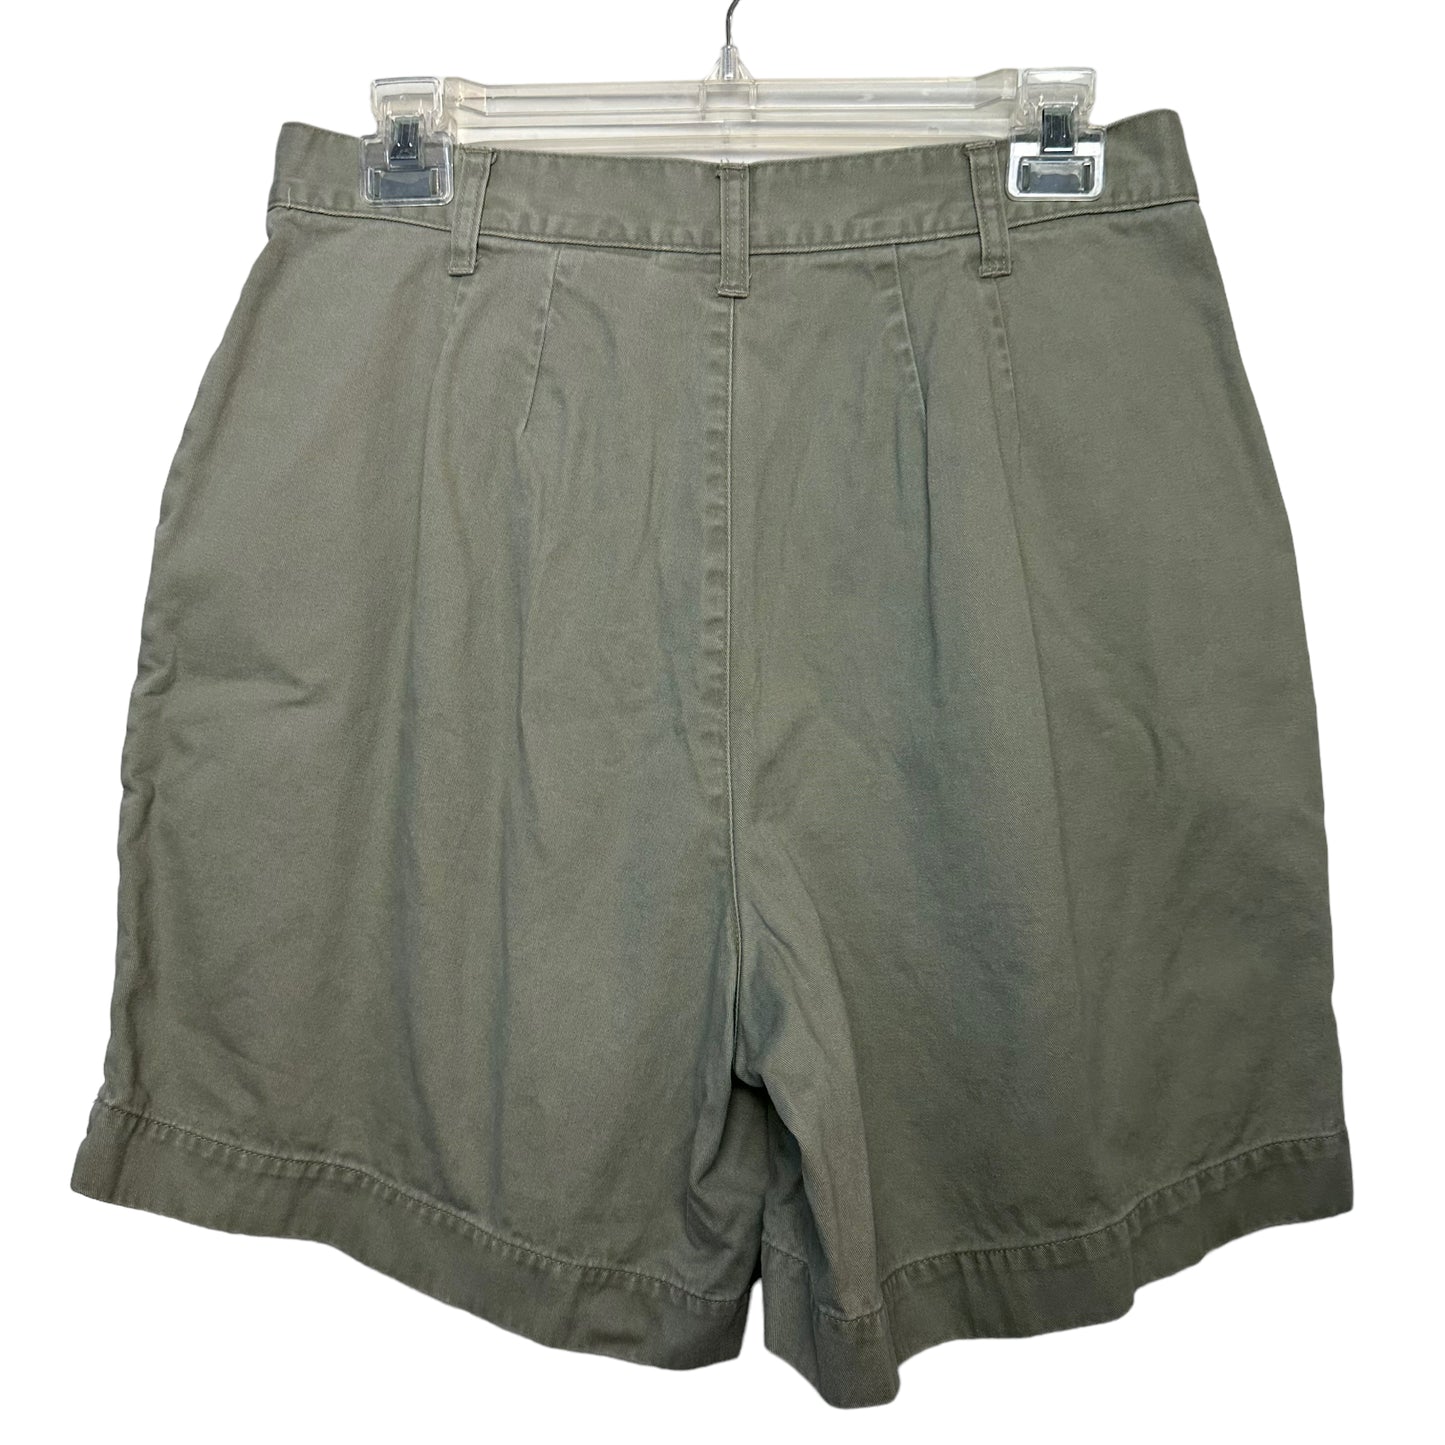 Vintage 90s Bill Blass High Rise Pleat Front Shorts Olive Green Cotton Size 8